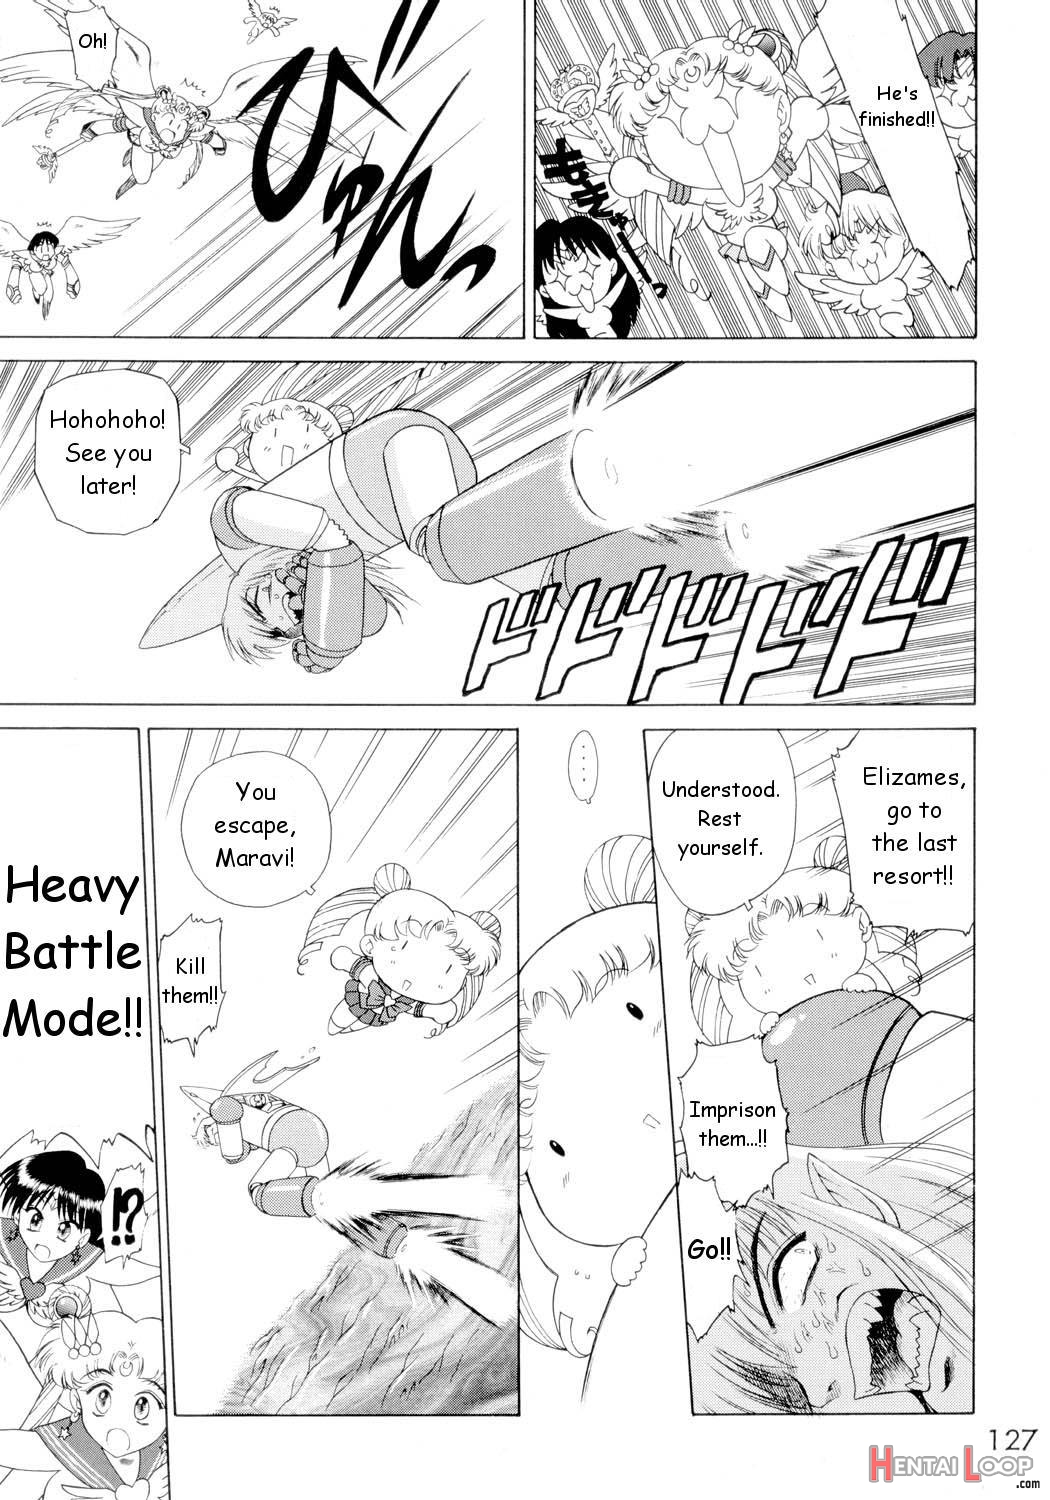 Submission Sailorstars page 126